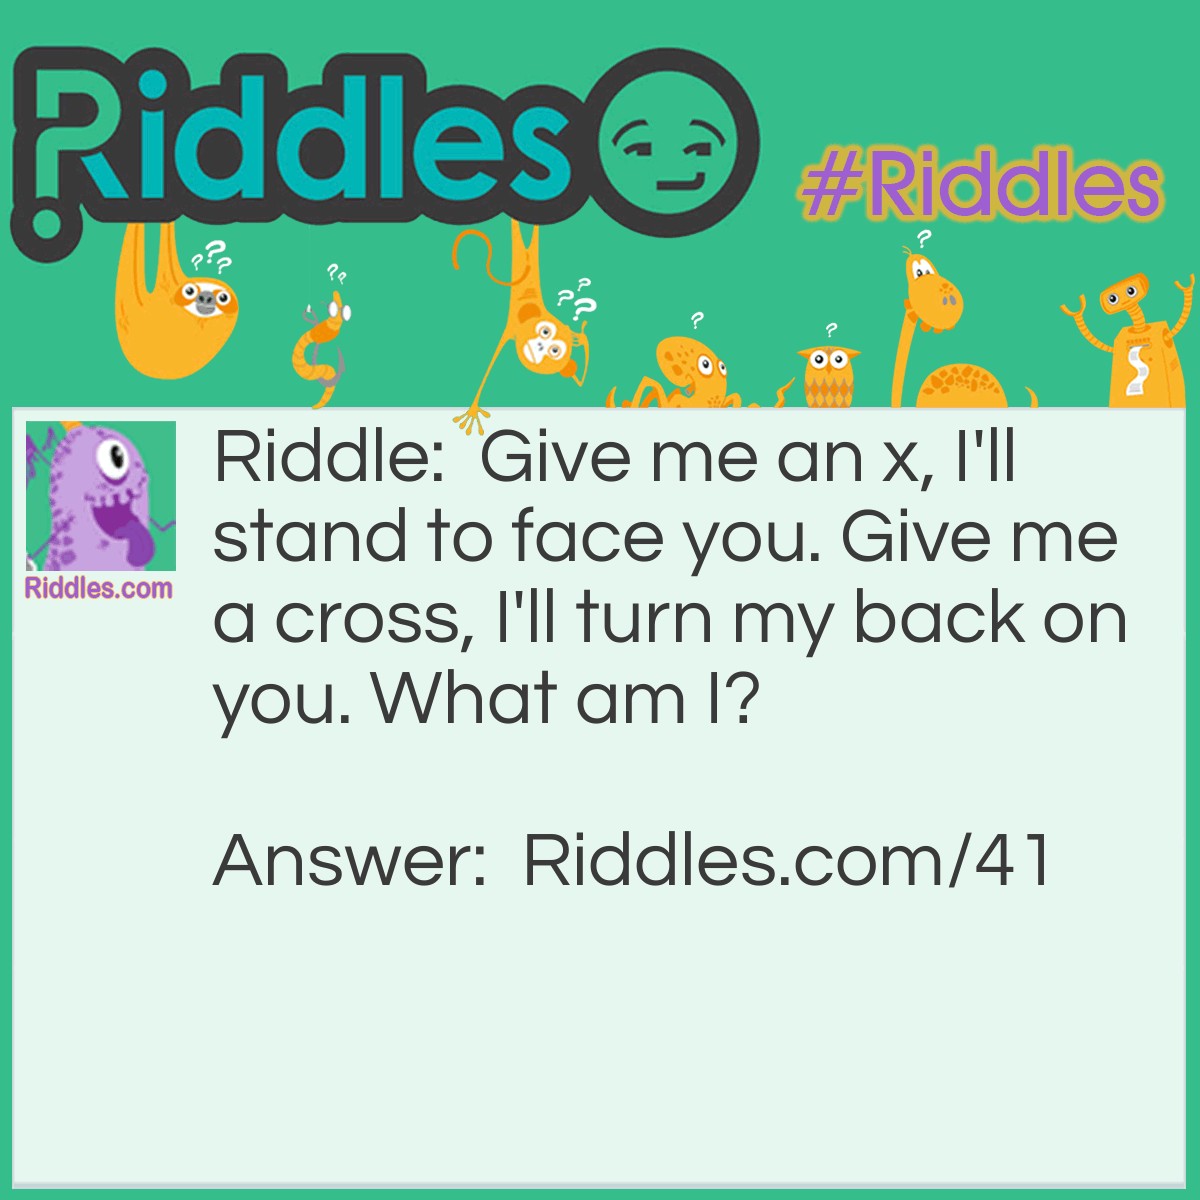 Riddle: Give me an x, I'll stand to face you. Give me a cross, I'll turn my back on you. What am I? Answer: The Number 9 (9 multipled by 9 = 81, 9 plus 9=18).